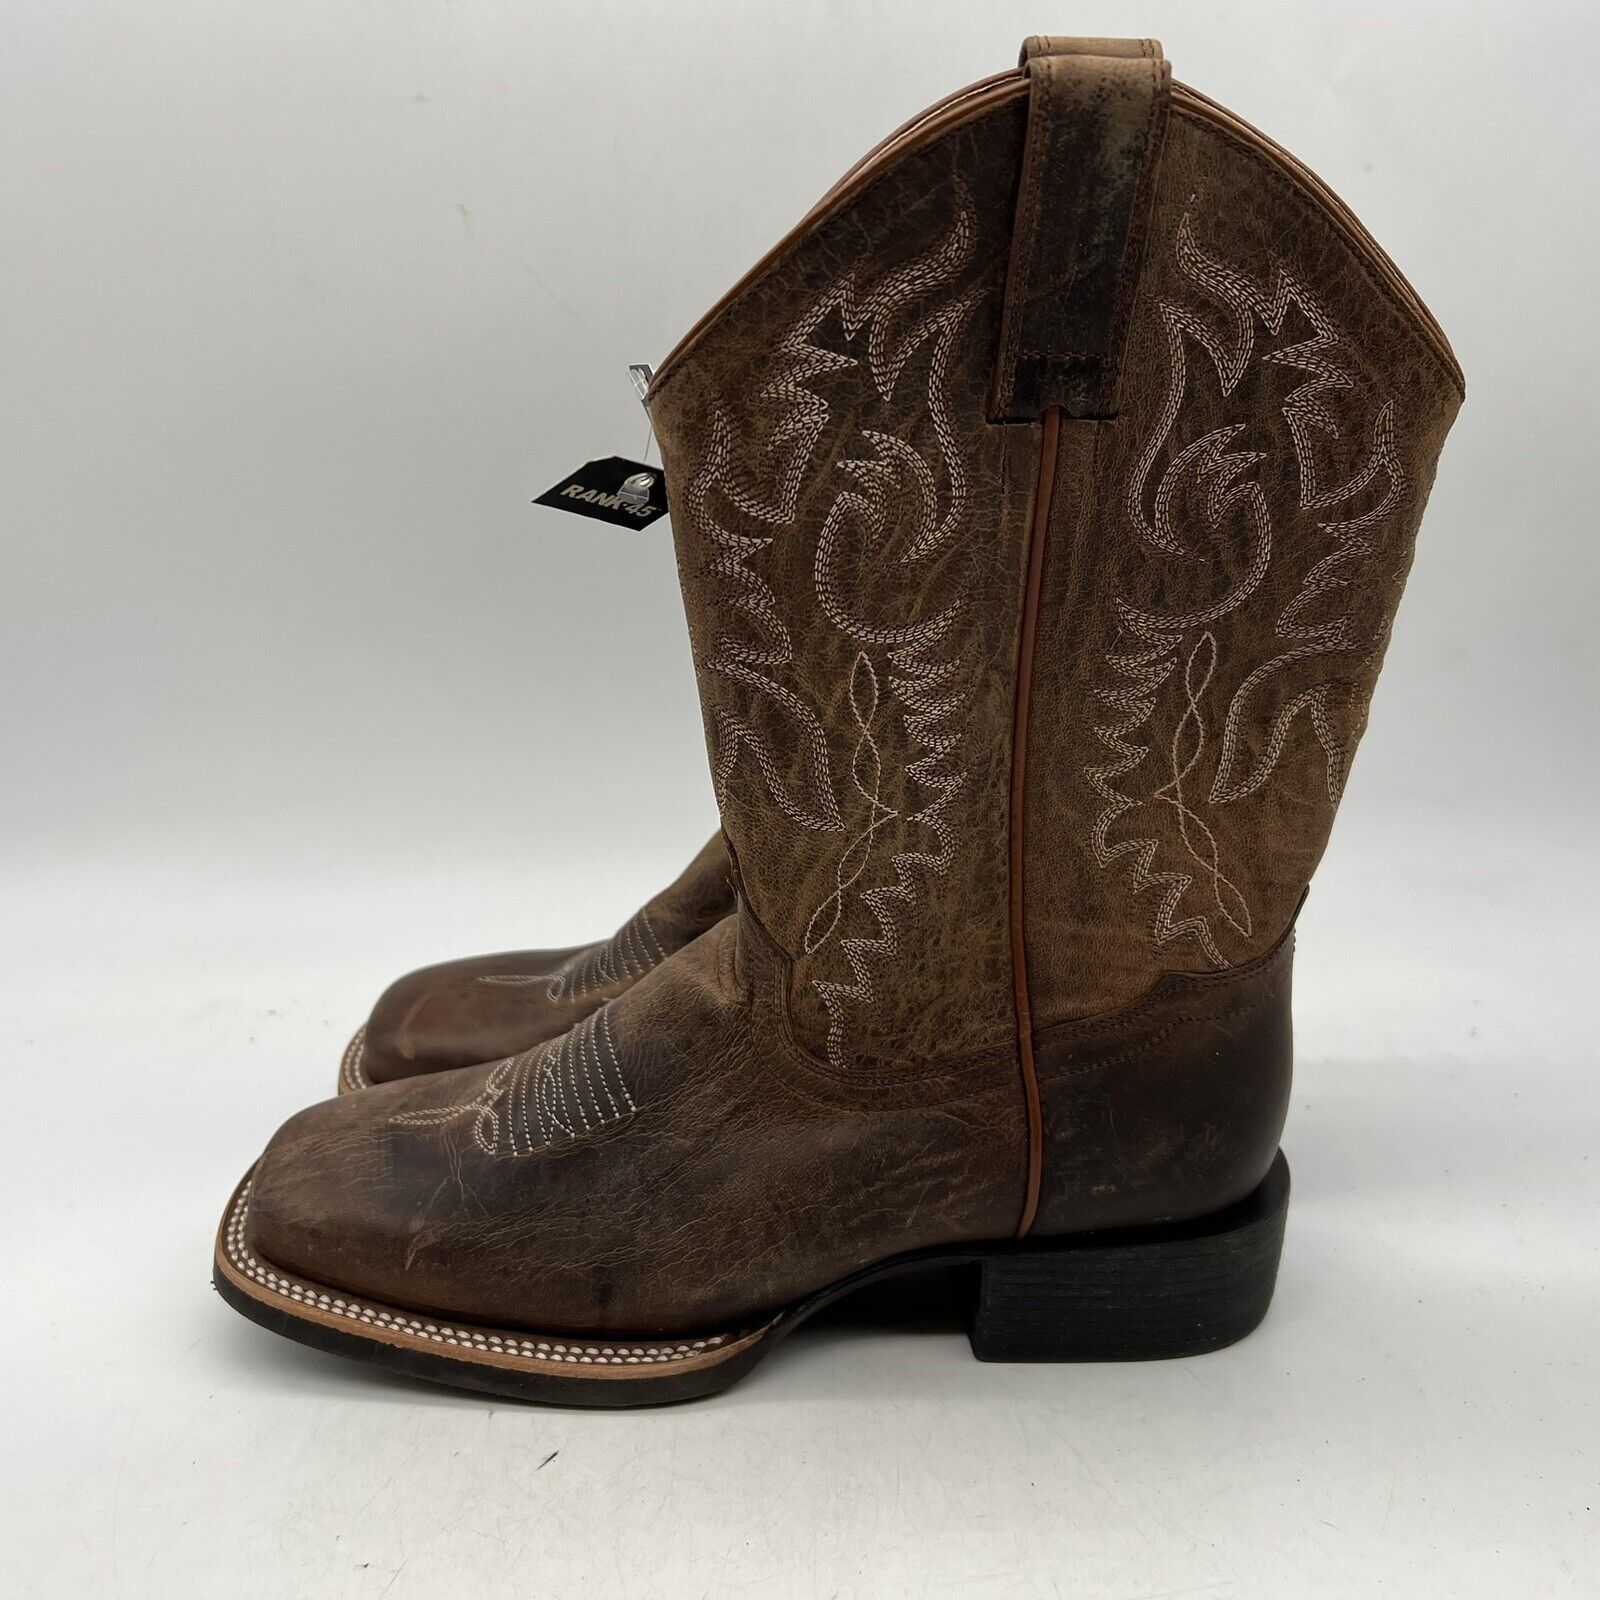 Primary image for Rank 45 Womens Shayla Xero Gravity Western Cowgirl Boots BSWFA21P1-B Size 8.5 M